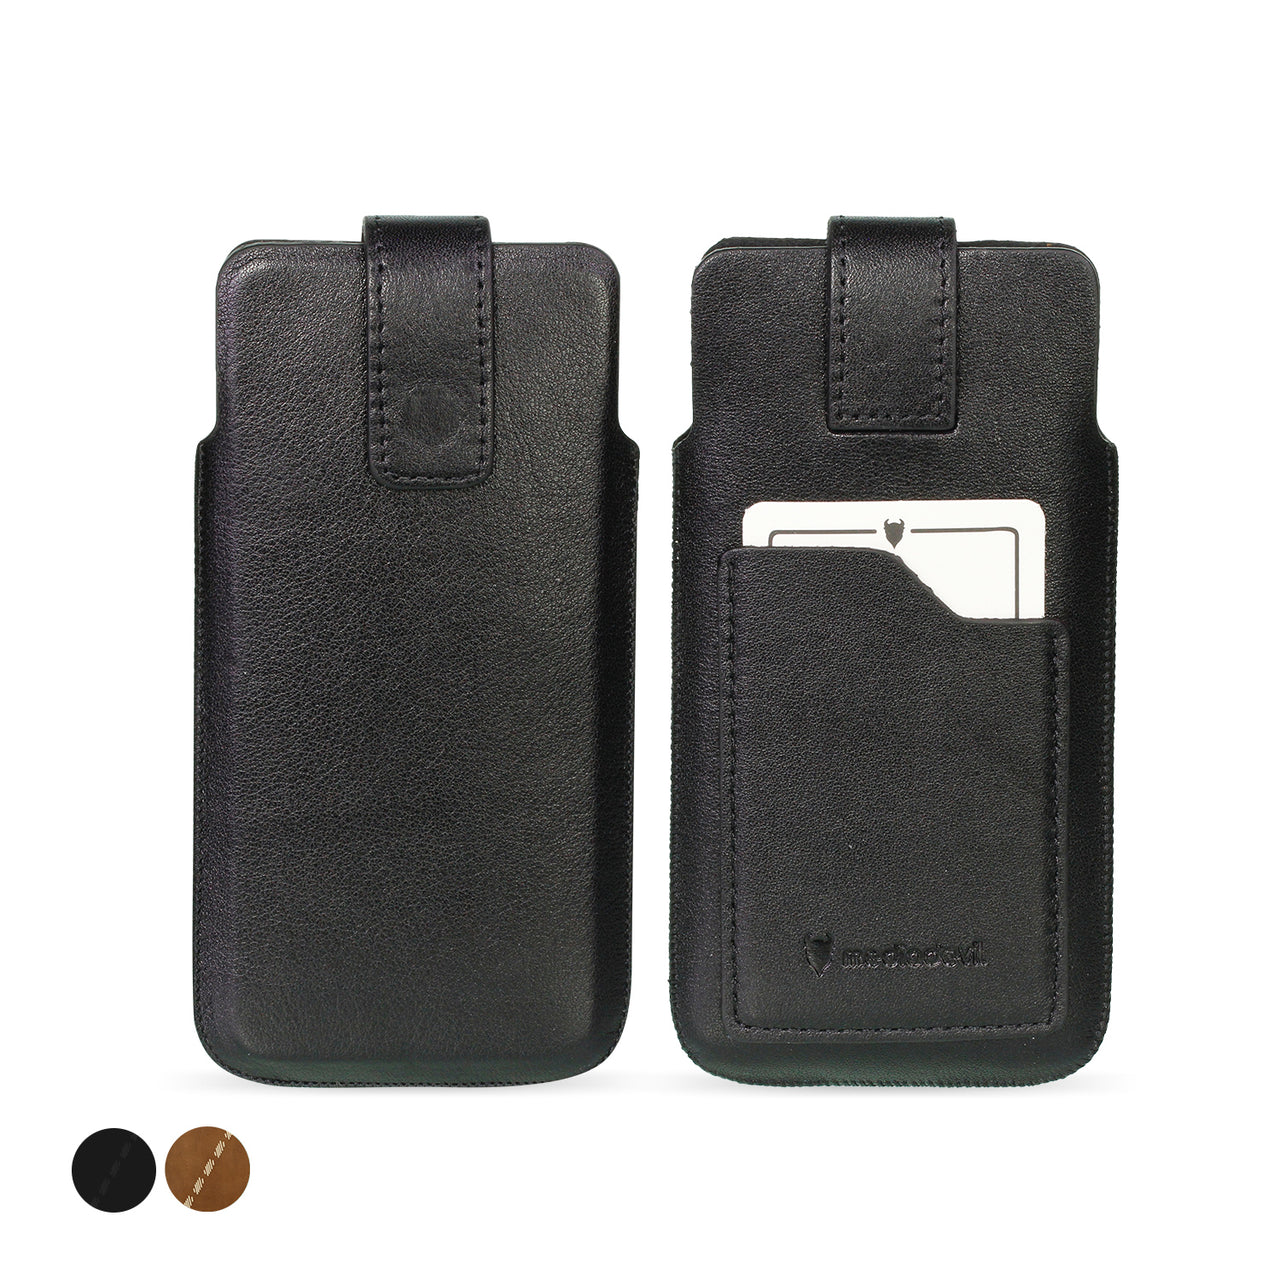 Genuine Leather Pouch Phone Case - Universal Size 3 (M)